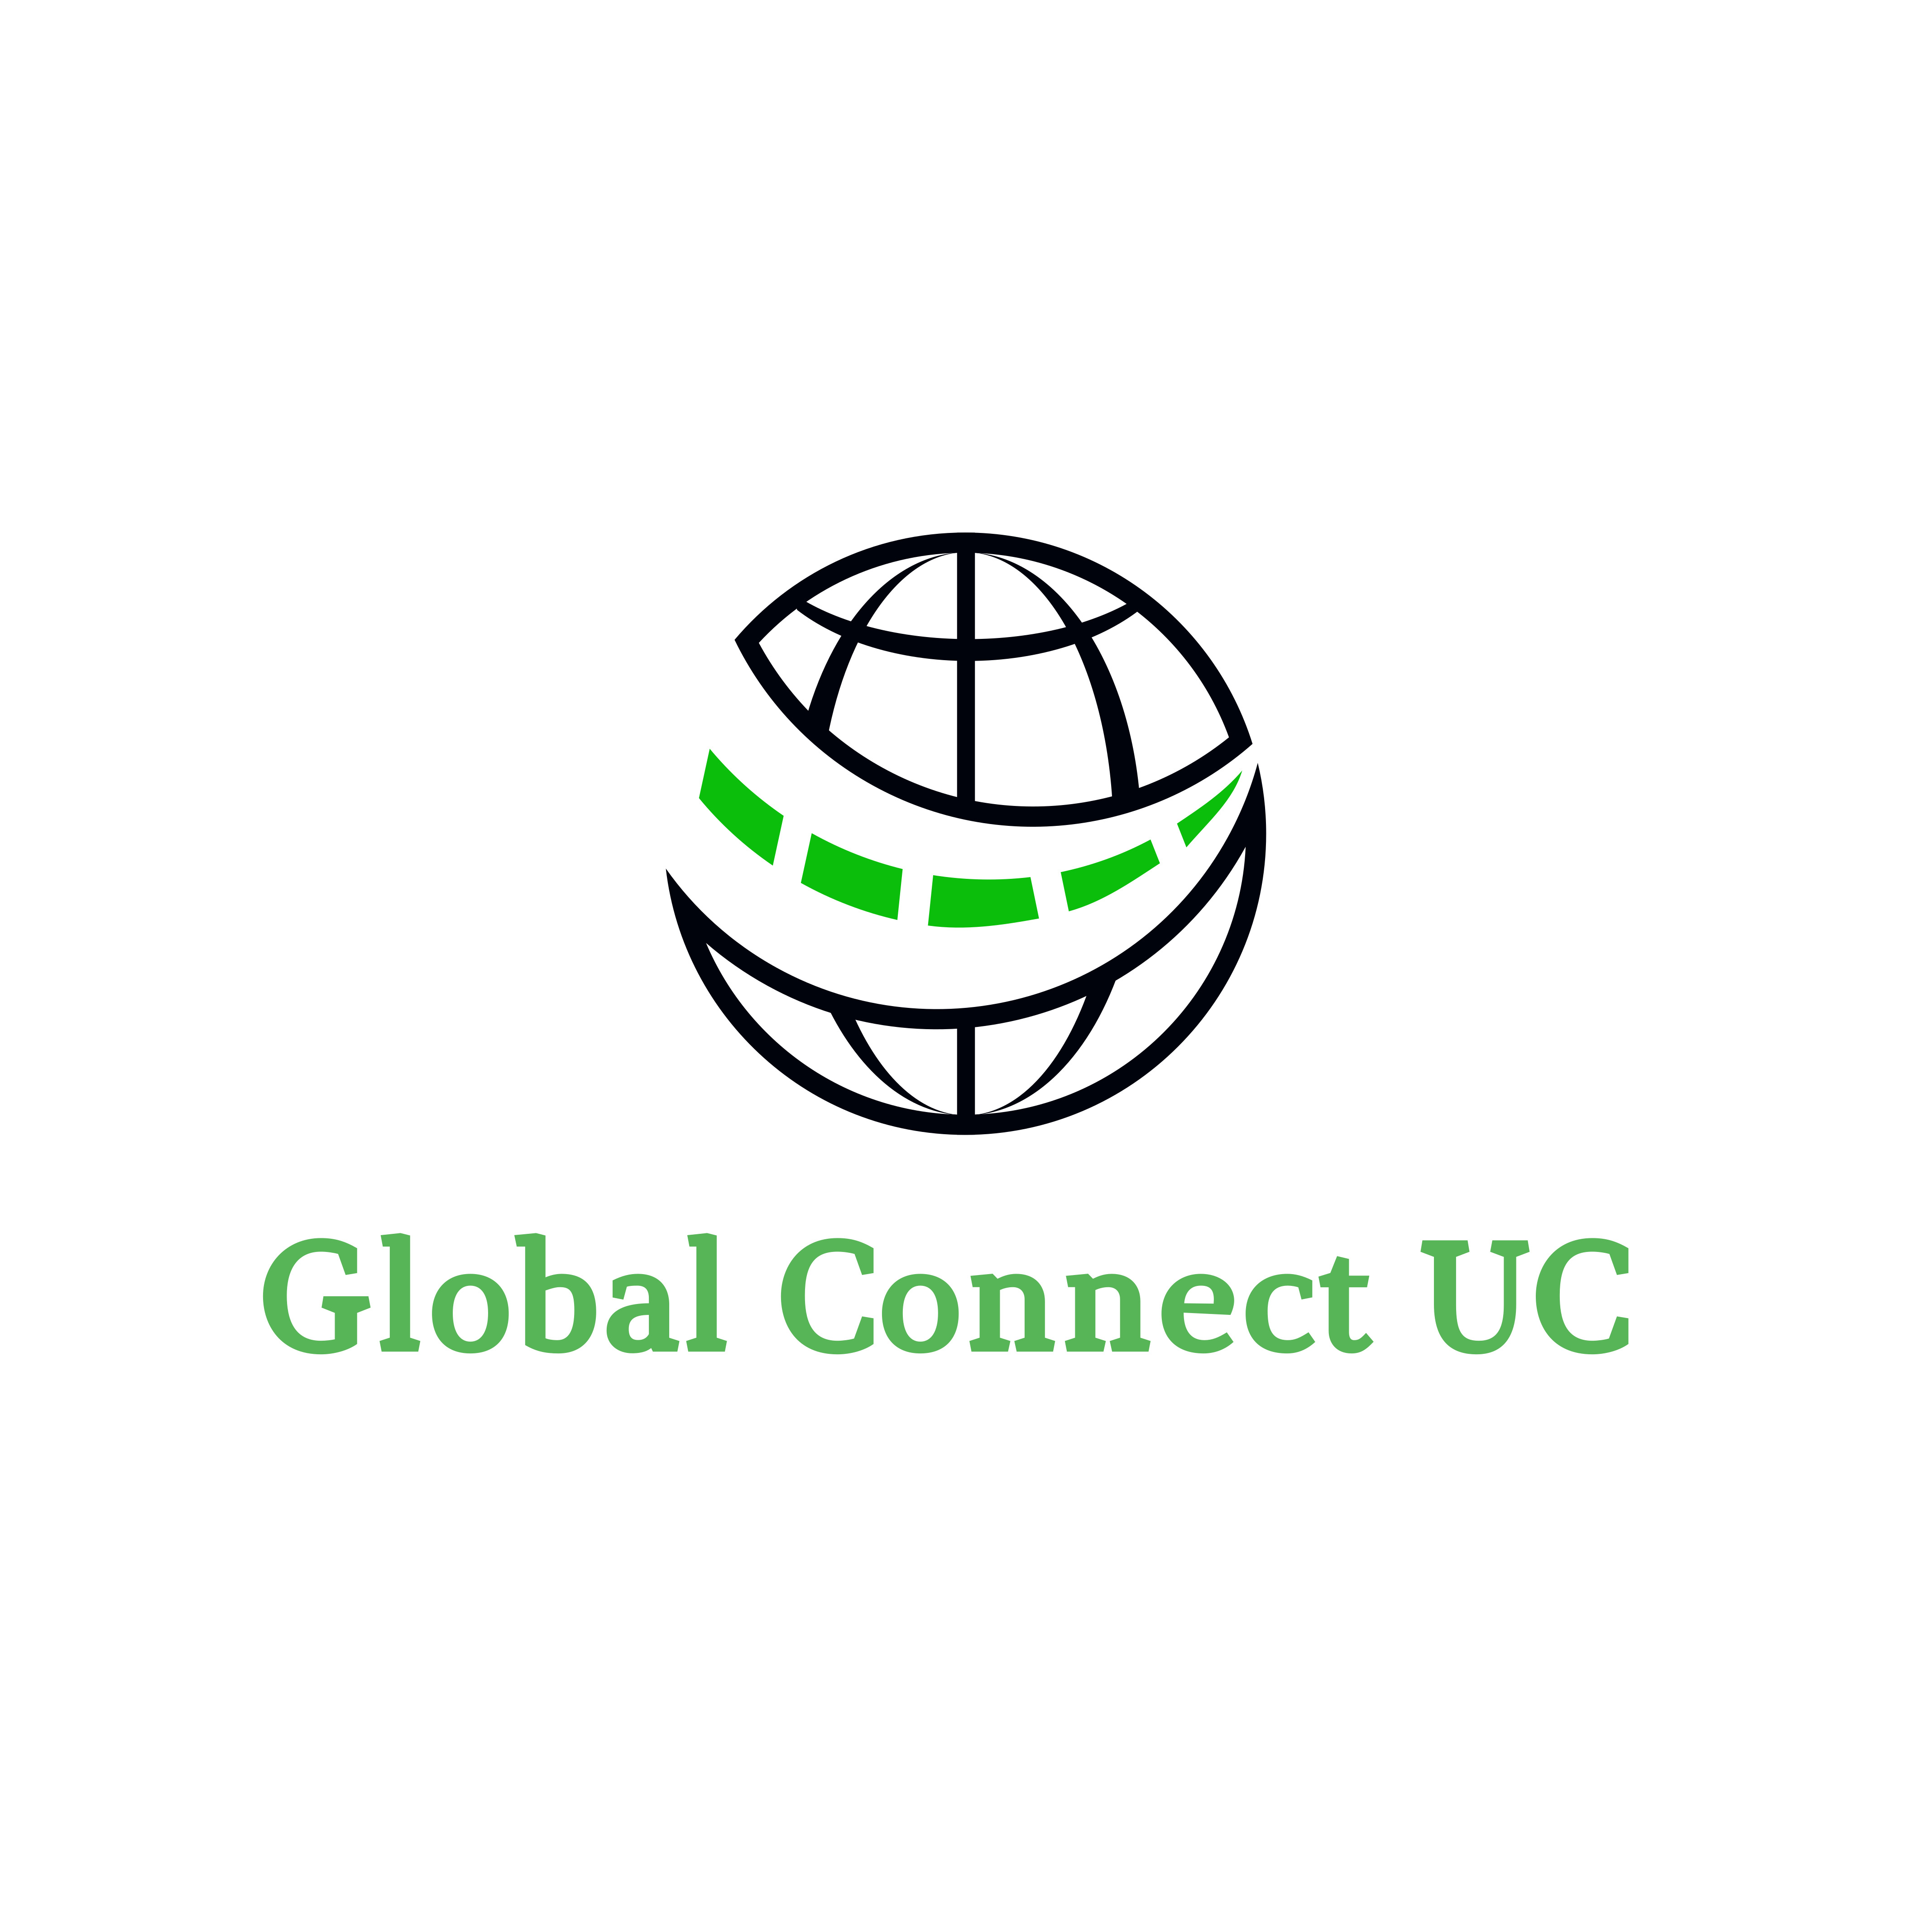 Global Connect UC Limited